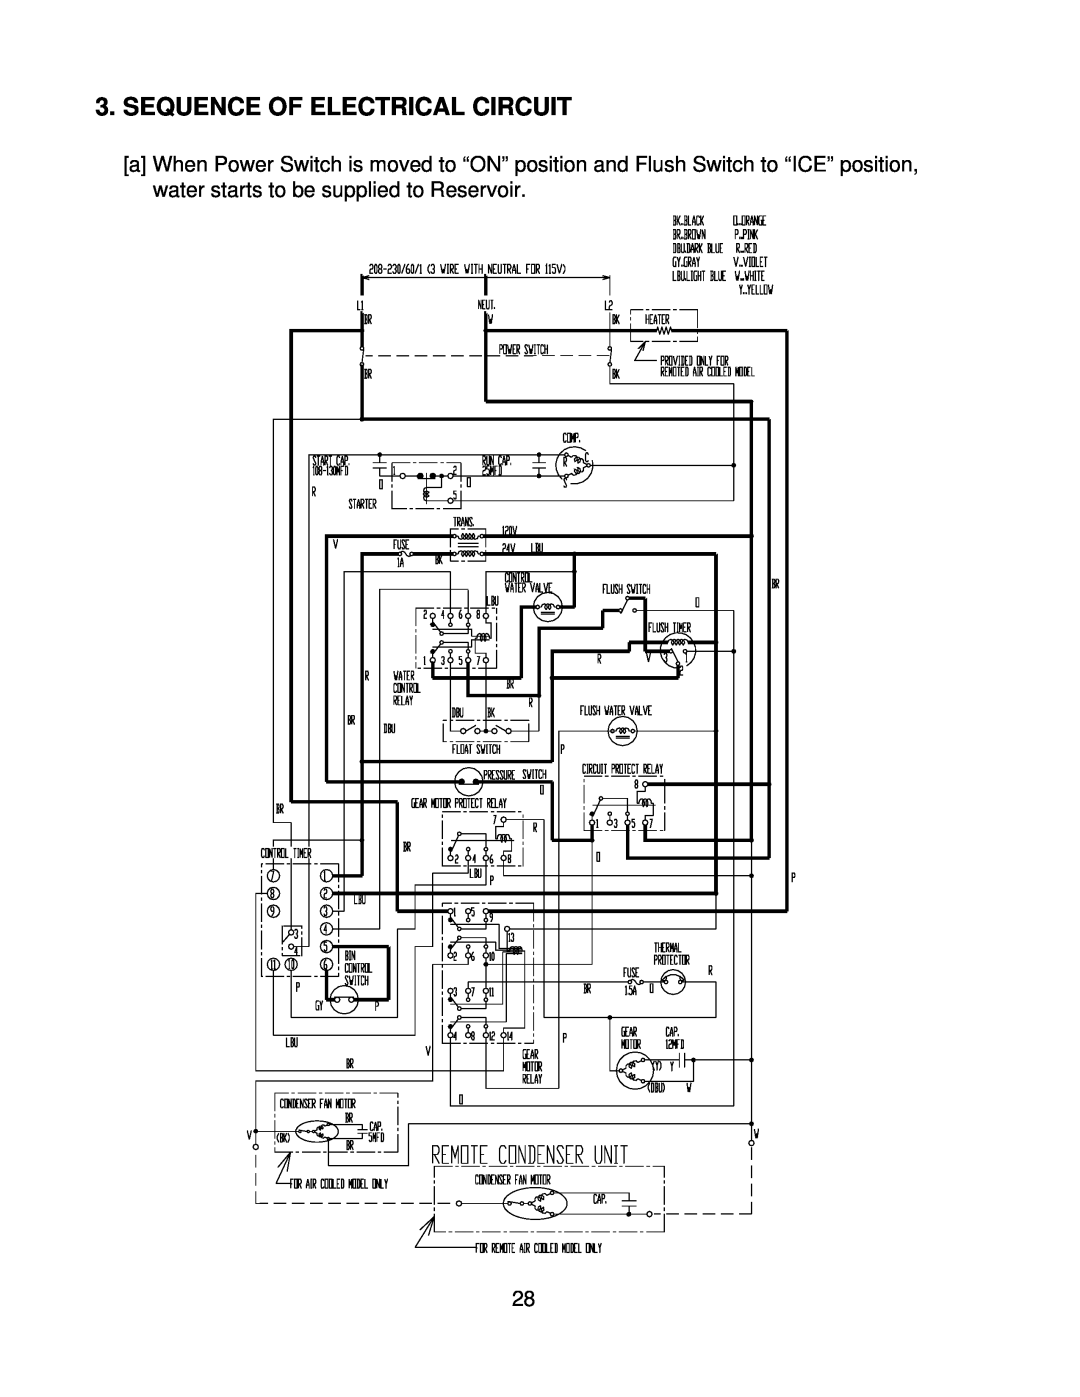 Hoshizaki F-1000MAF/-C, F-1000MLF/-C, F-1000MRF/-C, F-1000MWF/-C service manual Sequence Of Electrical Circuit 